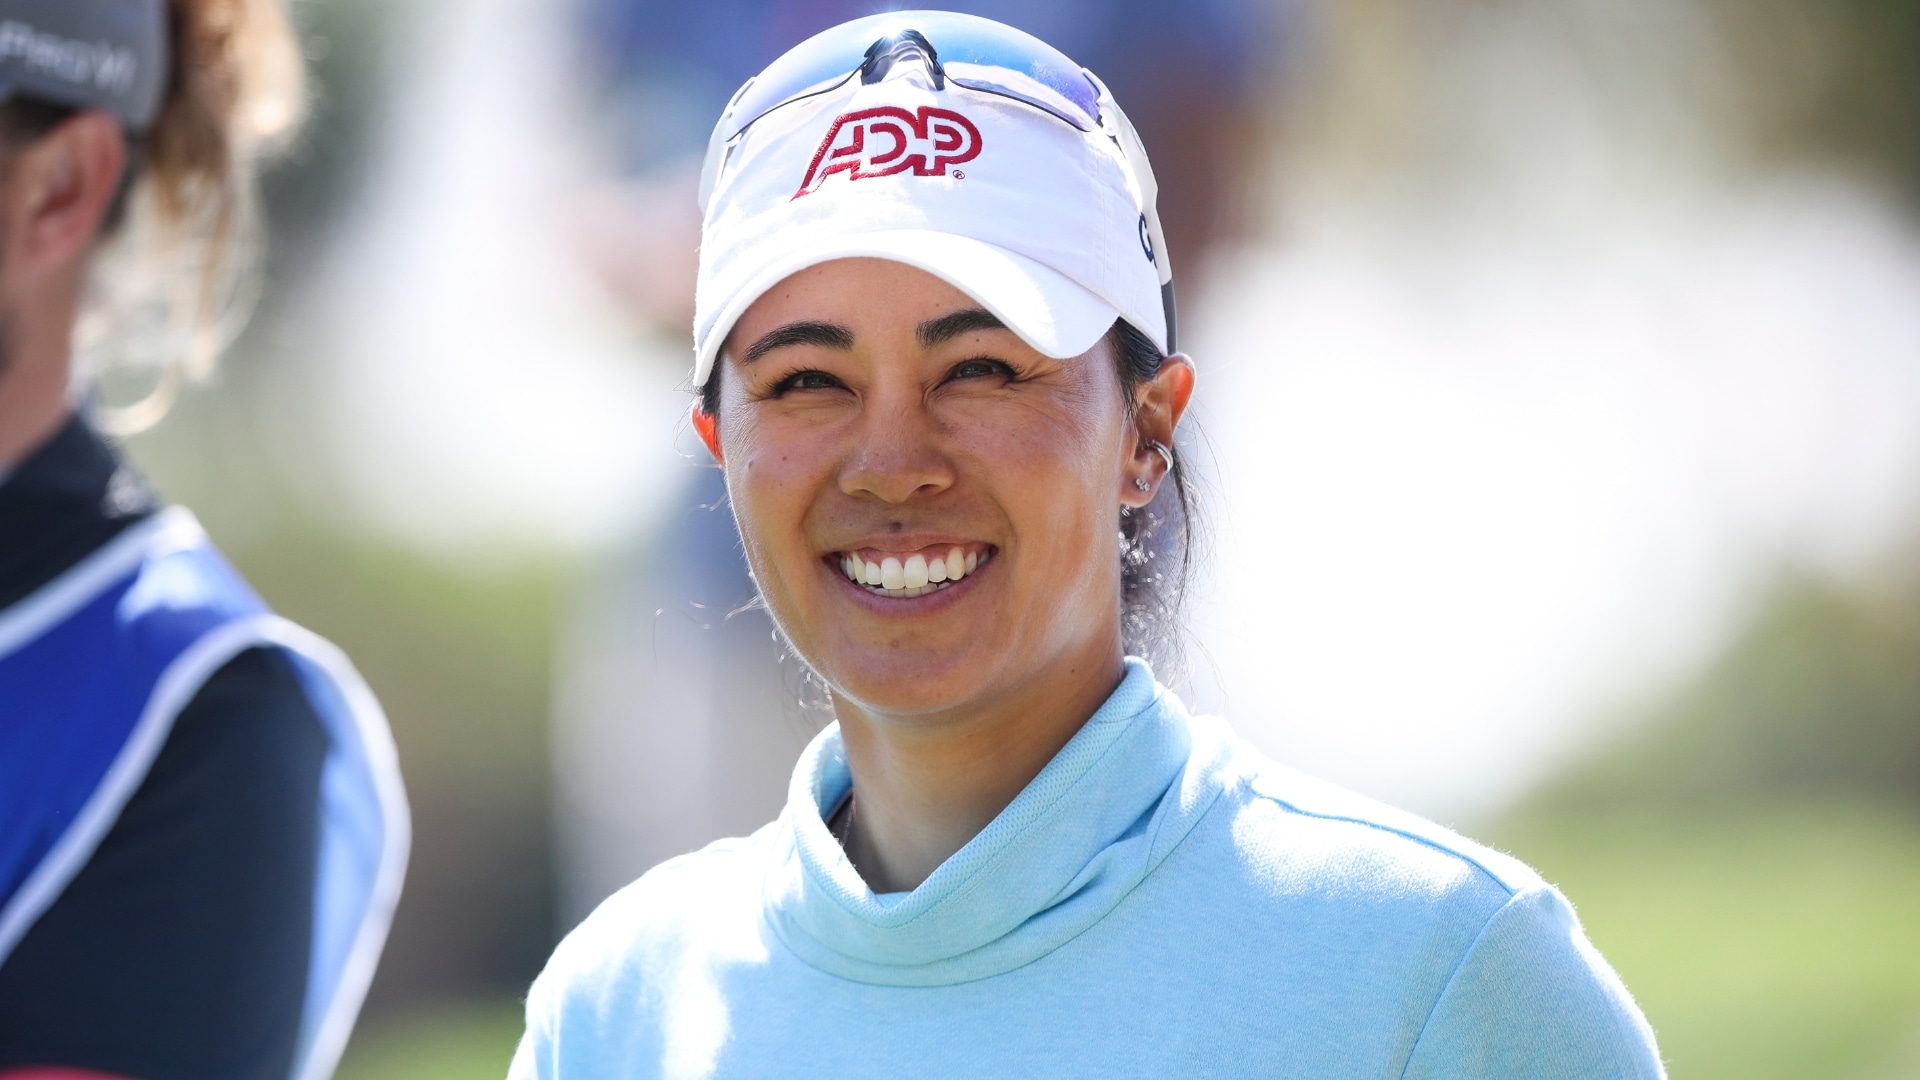 ‘We had a rhino charge us’: Danielle Kang’s hunt for normalcy leads to African adventure